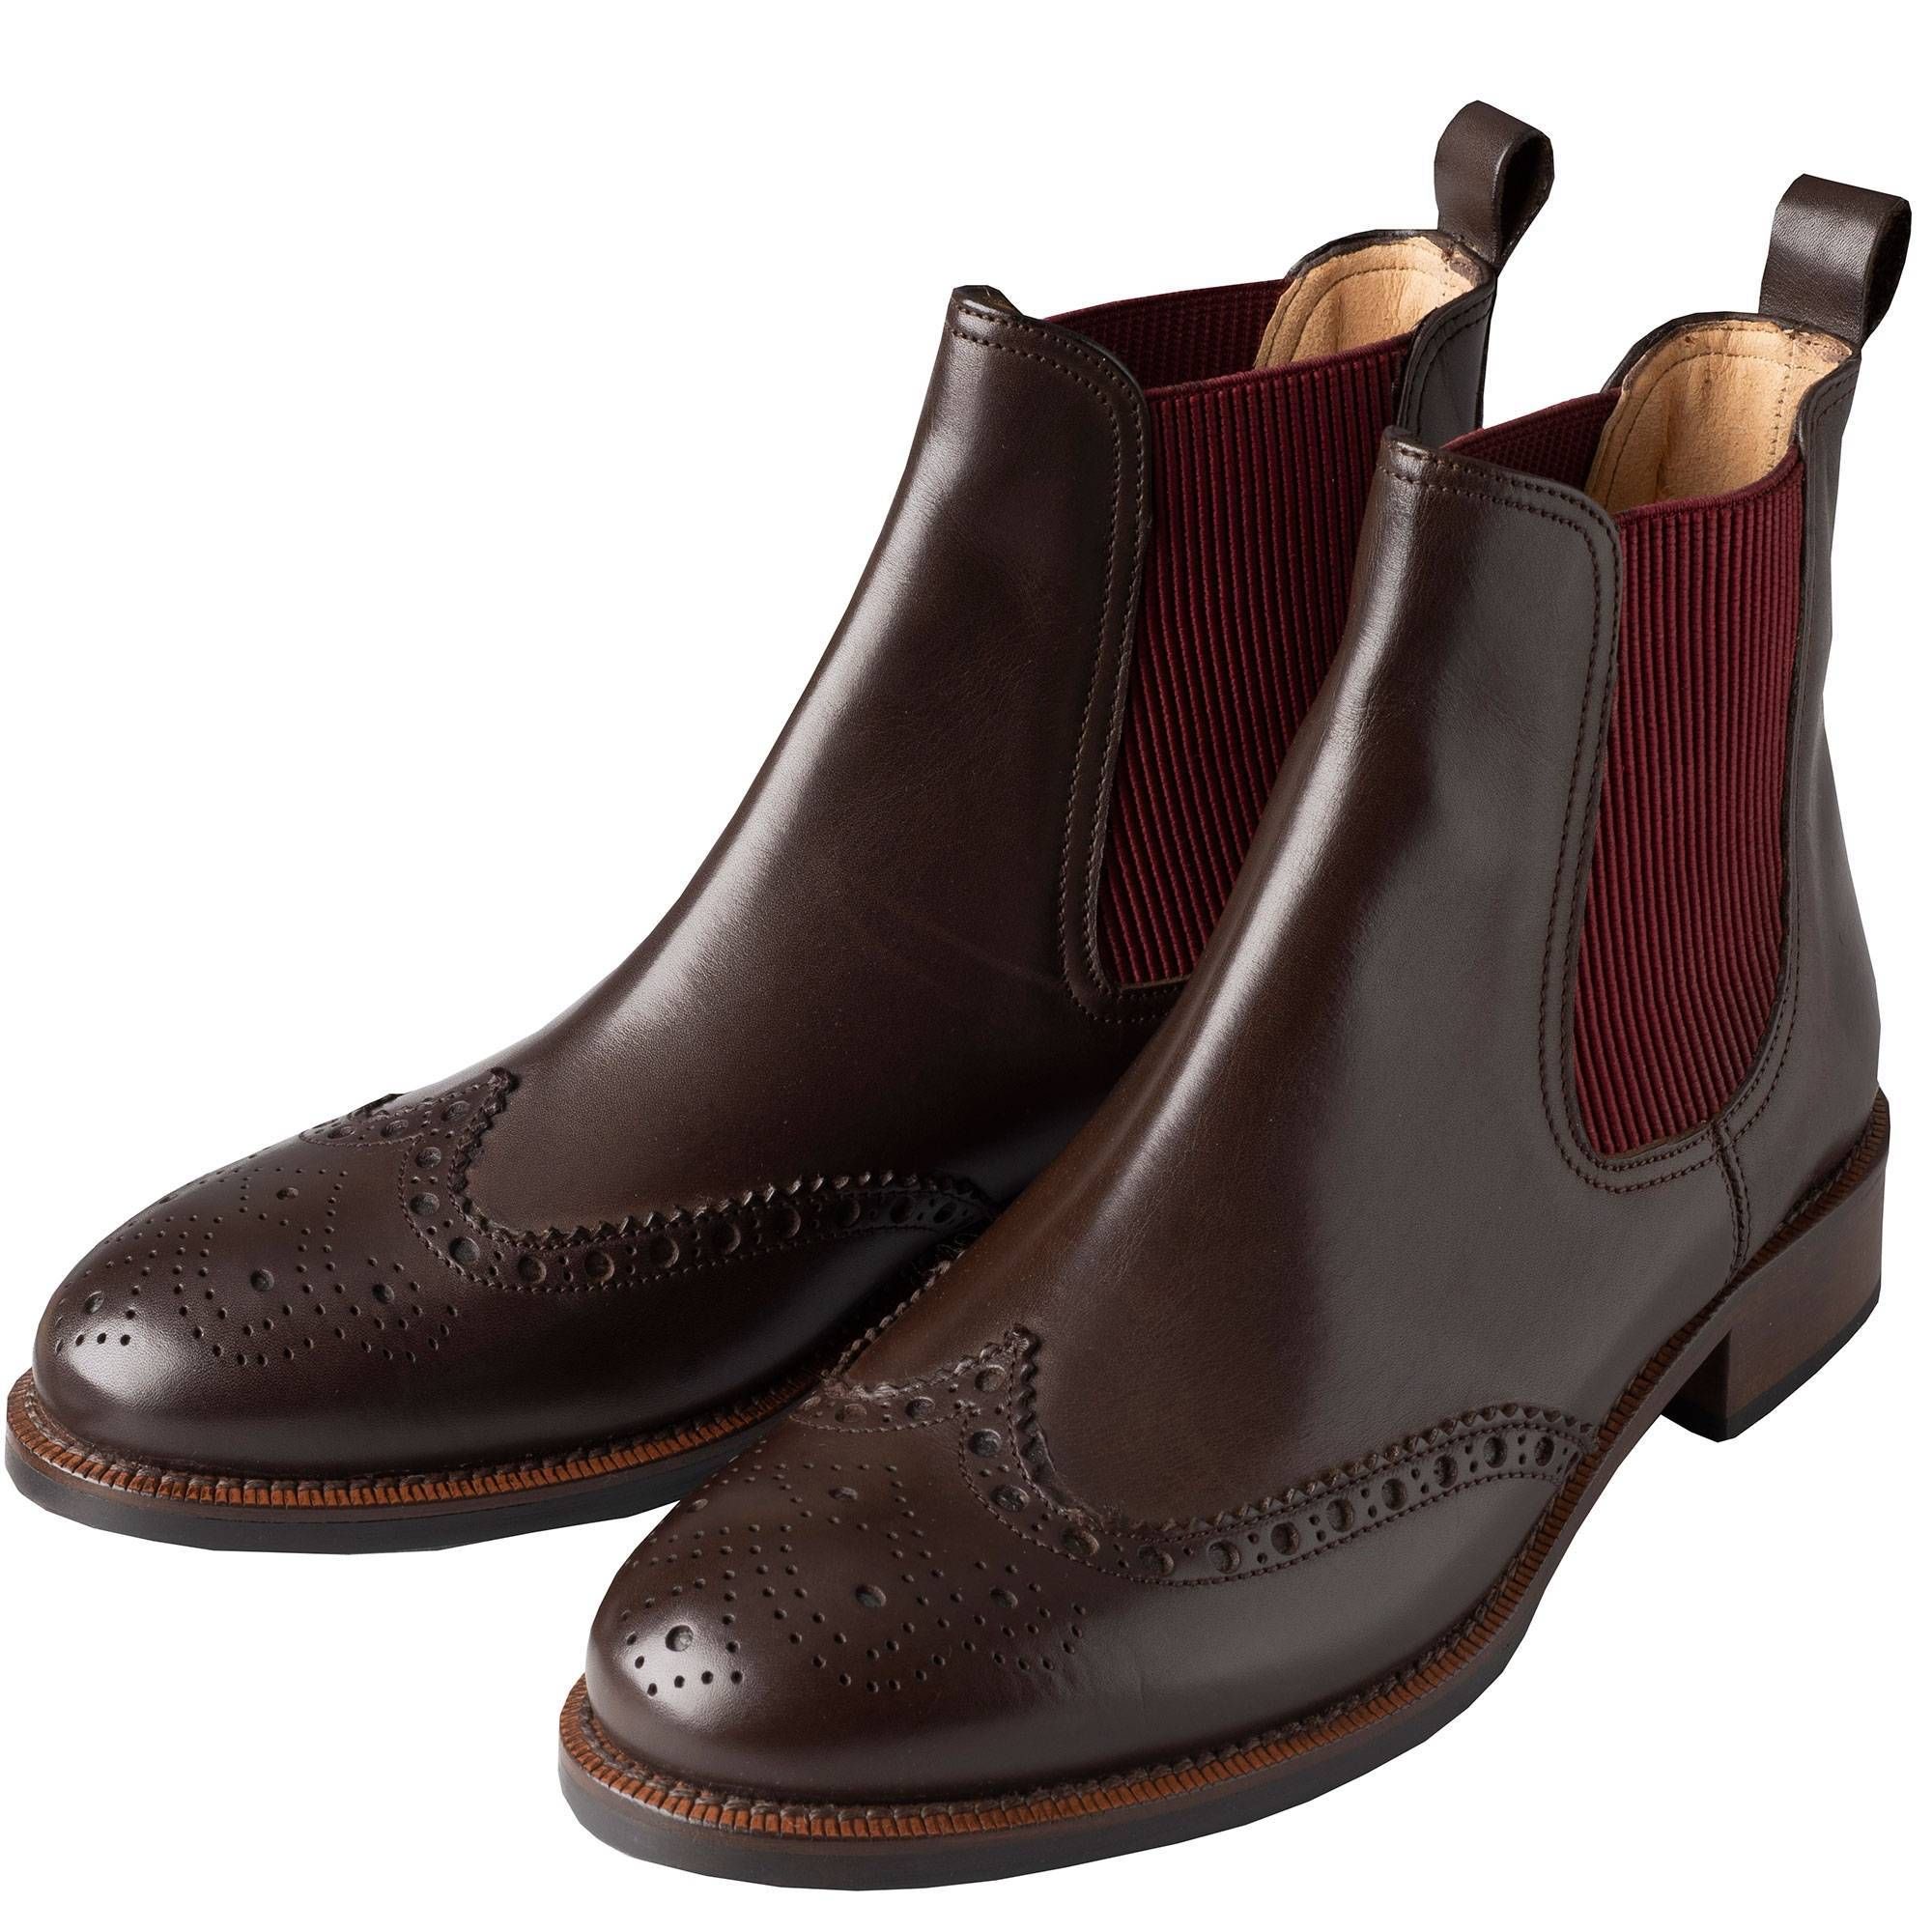 Brown Leather Brogue Chelsea Boots | Ladies Country Clothing | Cordings